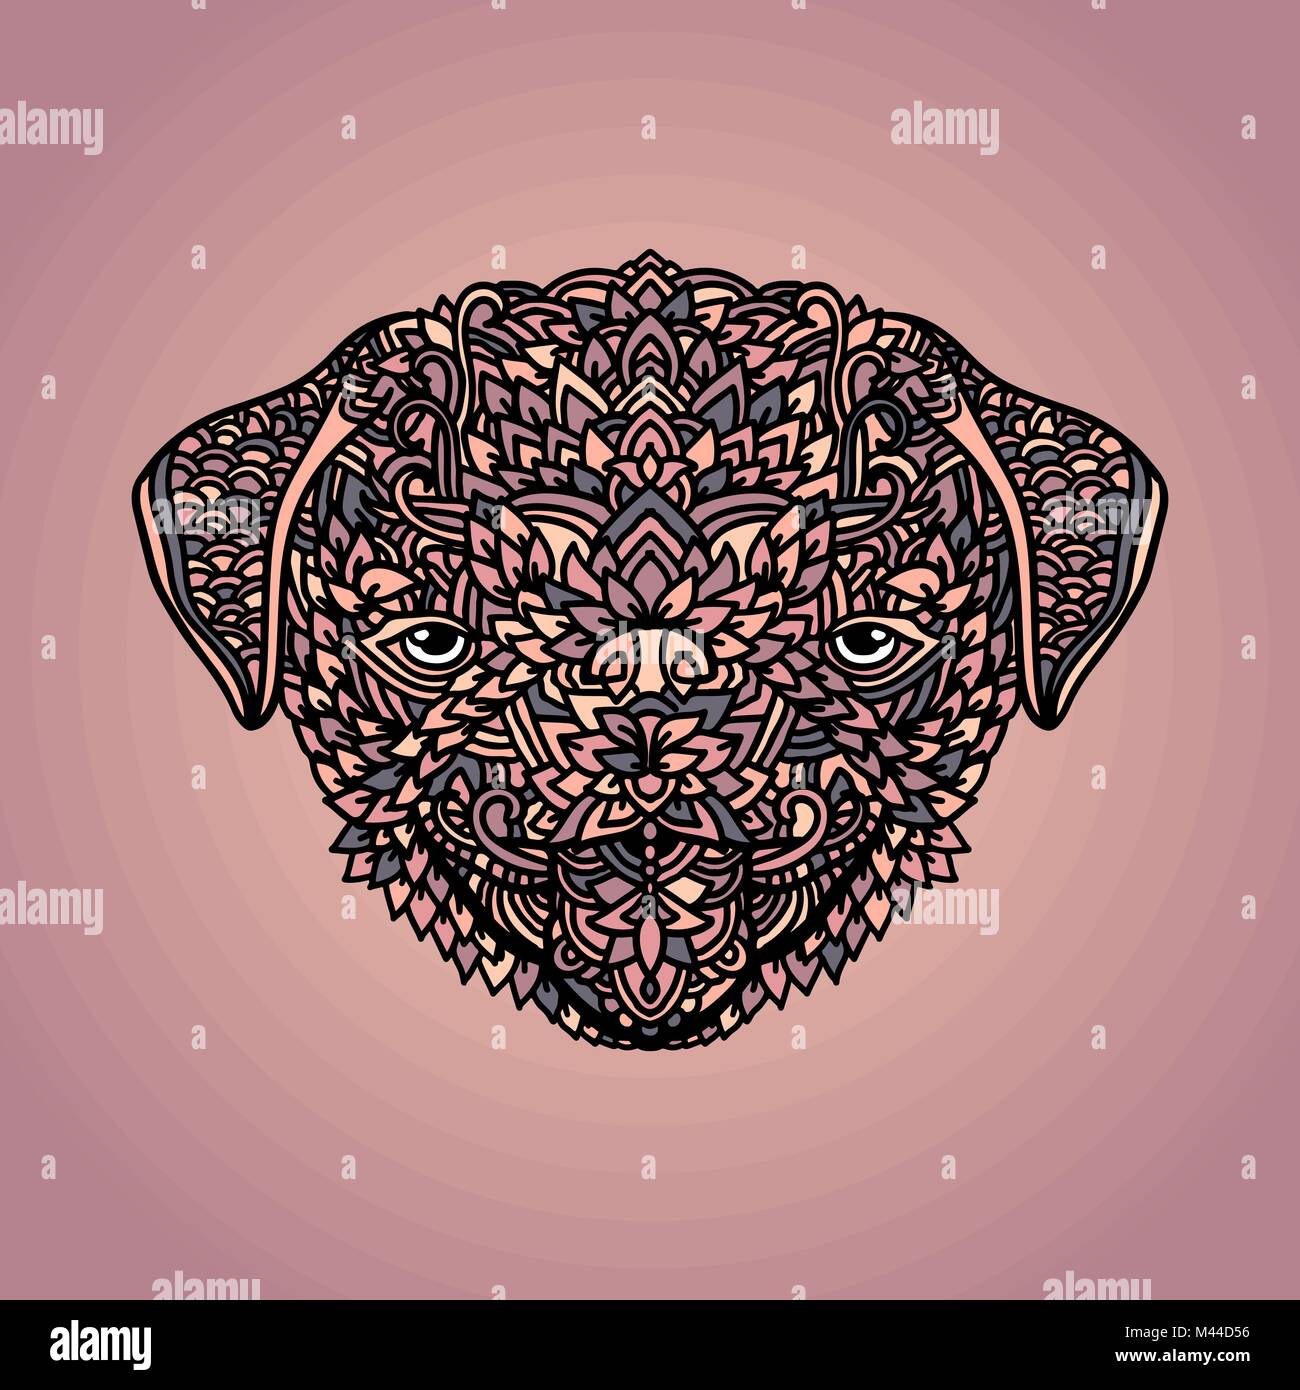 Pug with ethnic floral ornaments for adult coloring book. Zentagle pattern. Vector doodle illustration. Portrait of a cute pet. Stock Vector